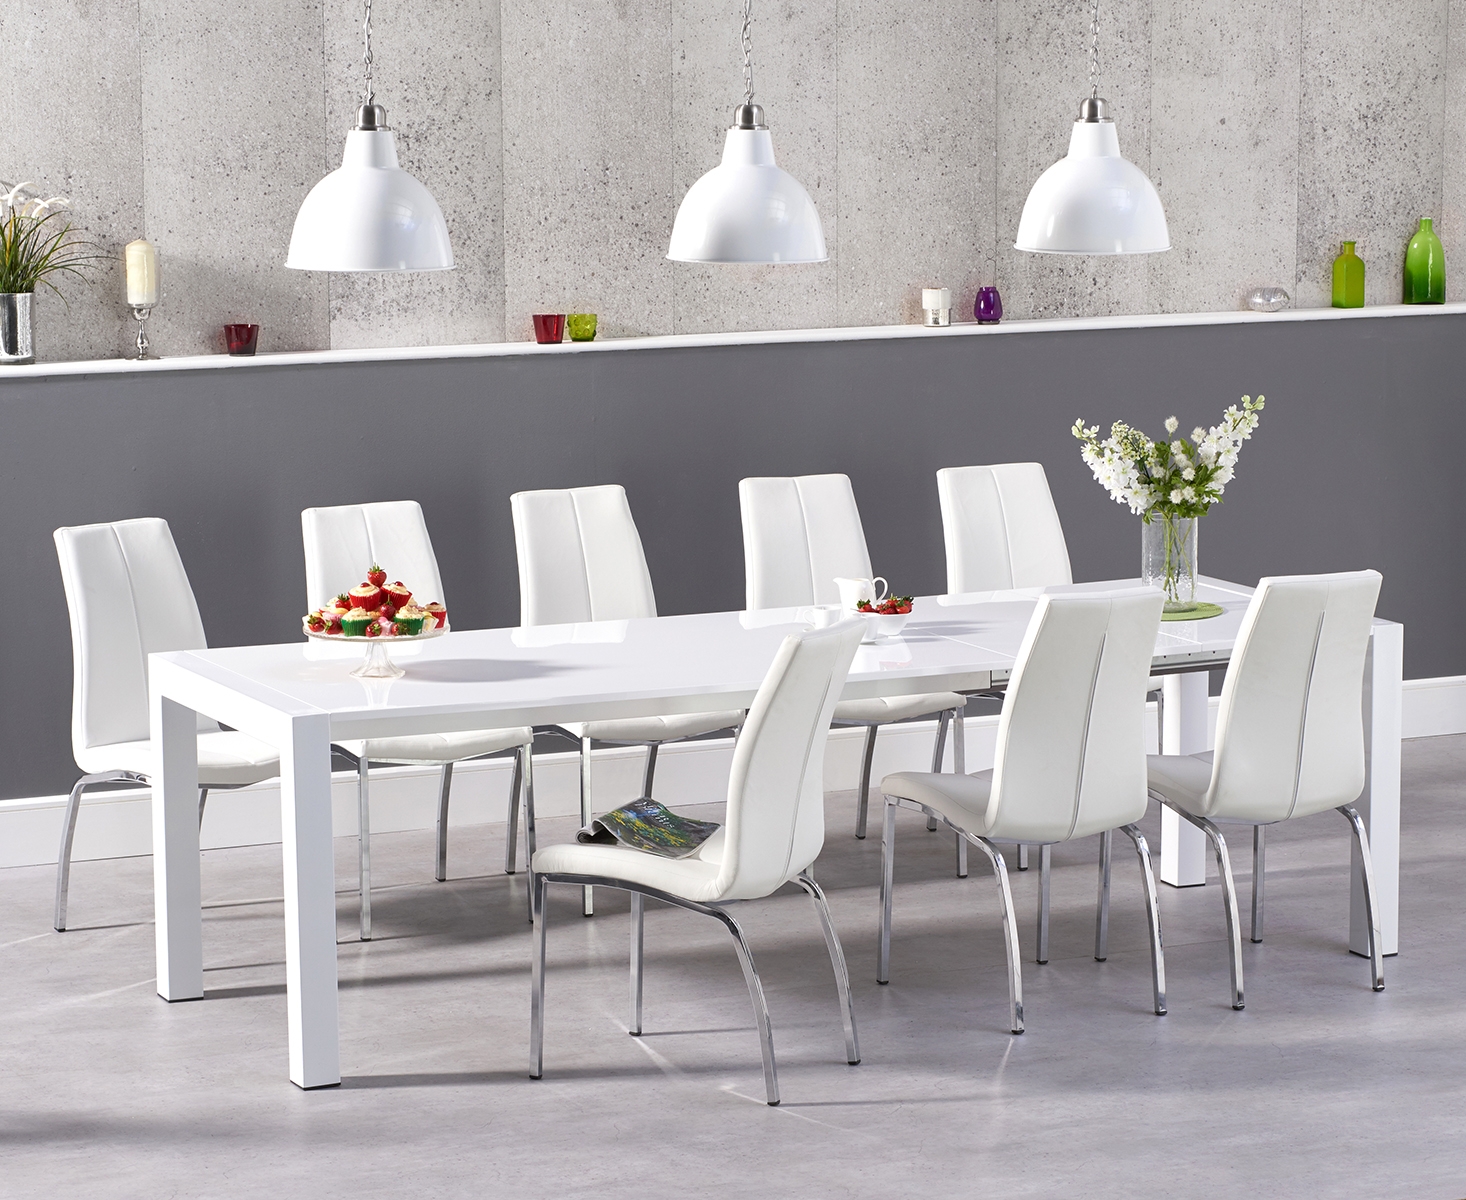 Extending Cleveland White High Gloss Dining Table With 12 Ivory White Marco Chairs